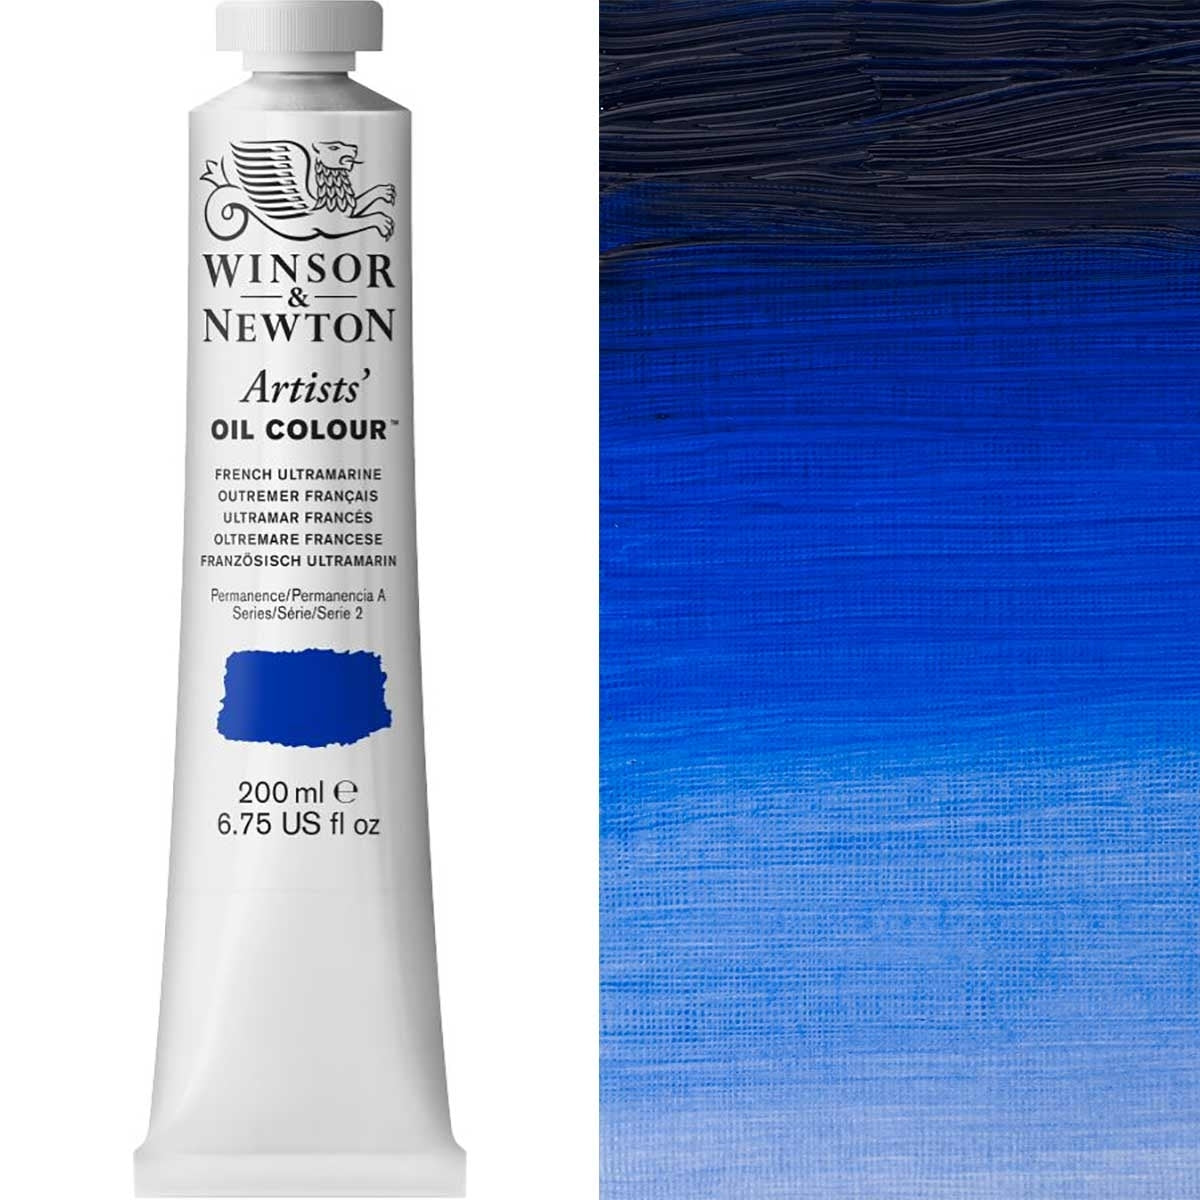 Winsor and Newton - Artists' Oil Colour - 200ml - French Ultramarine